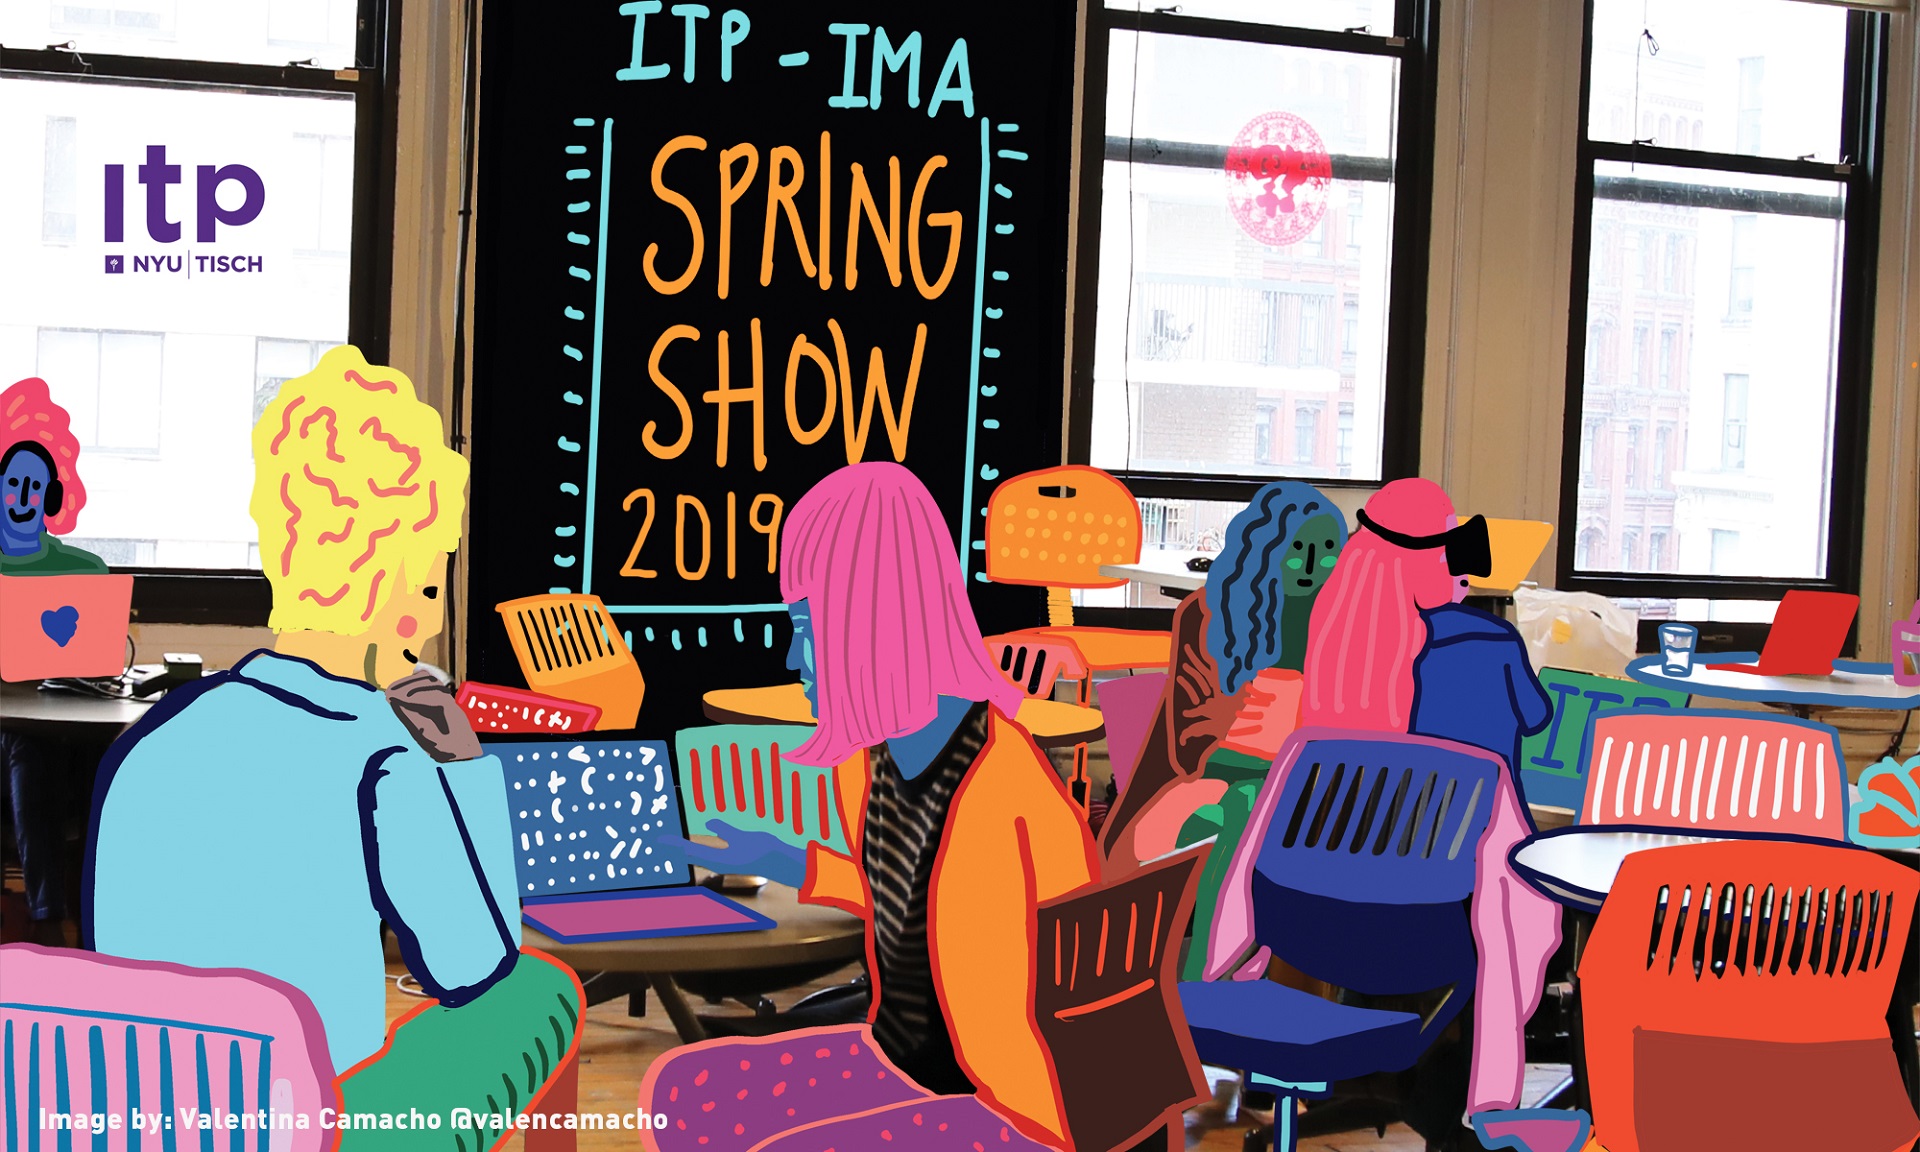  Image of ITP Spring Show 2019 poster.